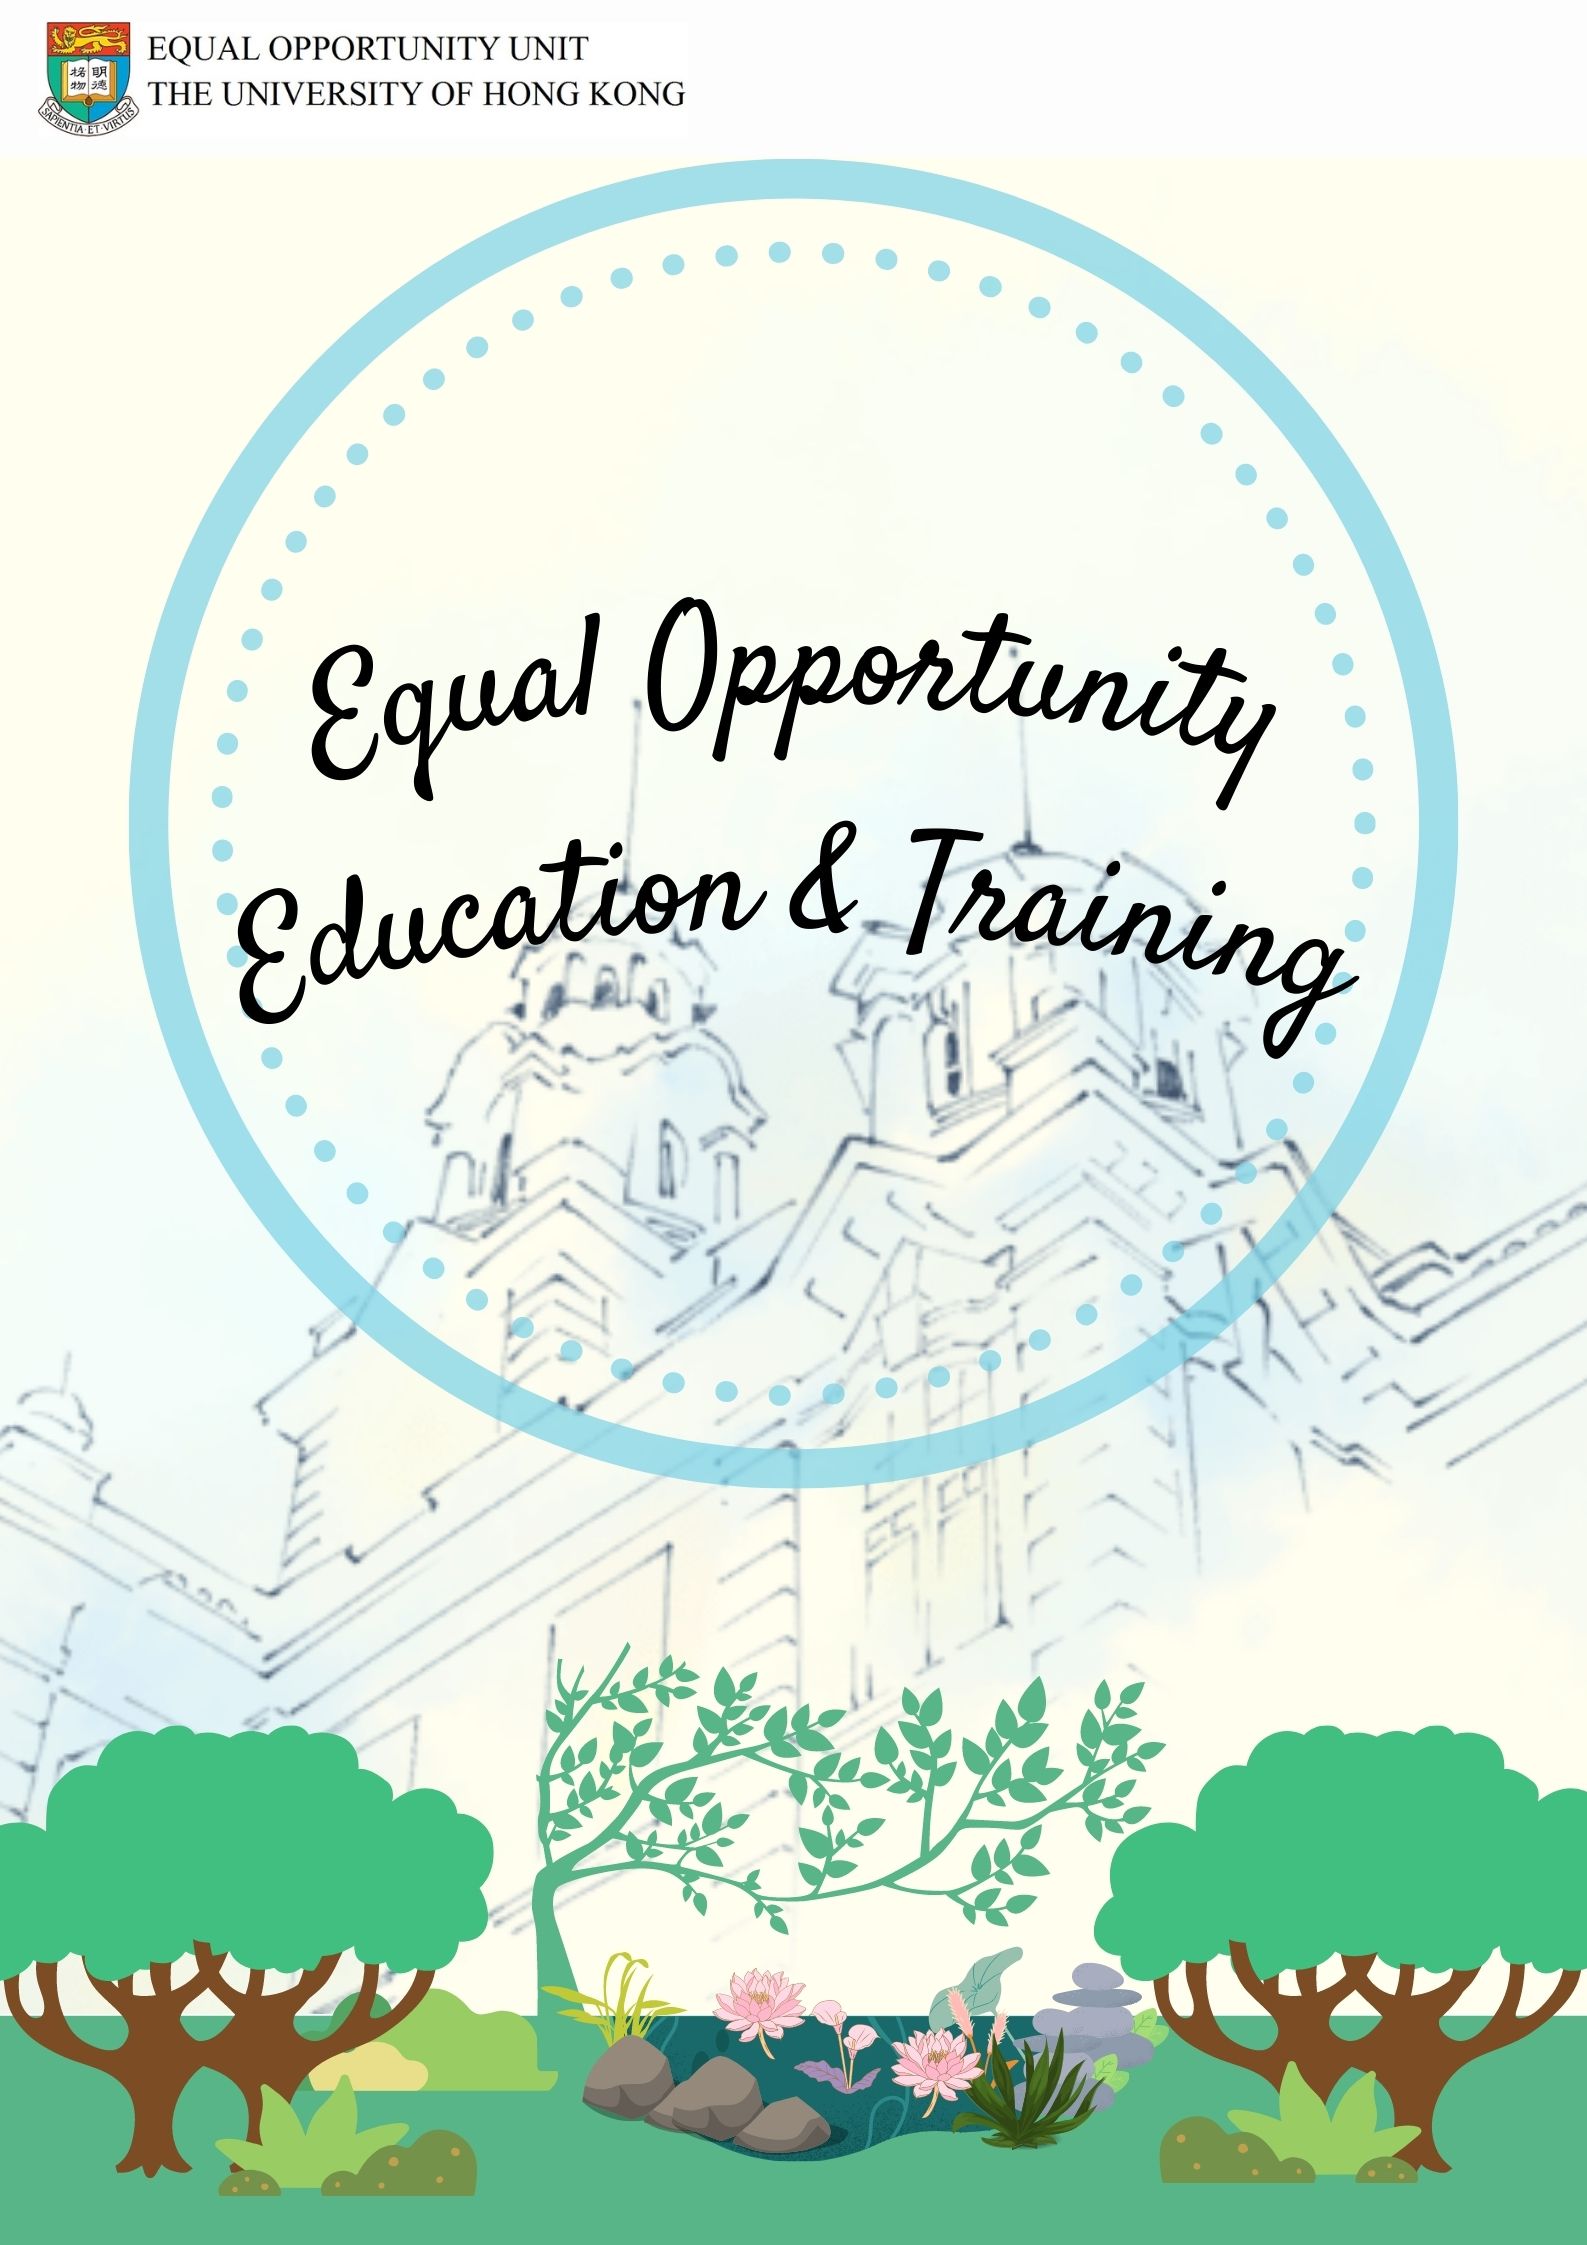 First responder training for Equal Opportunity Advisors (EOA) and Hall/College Tutors/Staff training (English session)  Poster. Content same as text on this webpage.